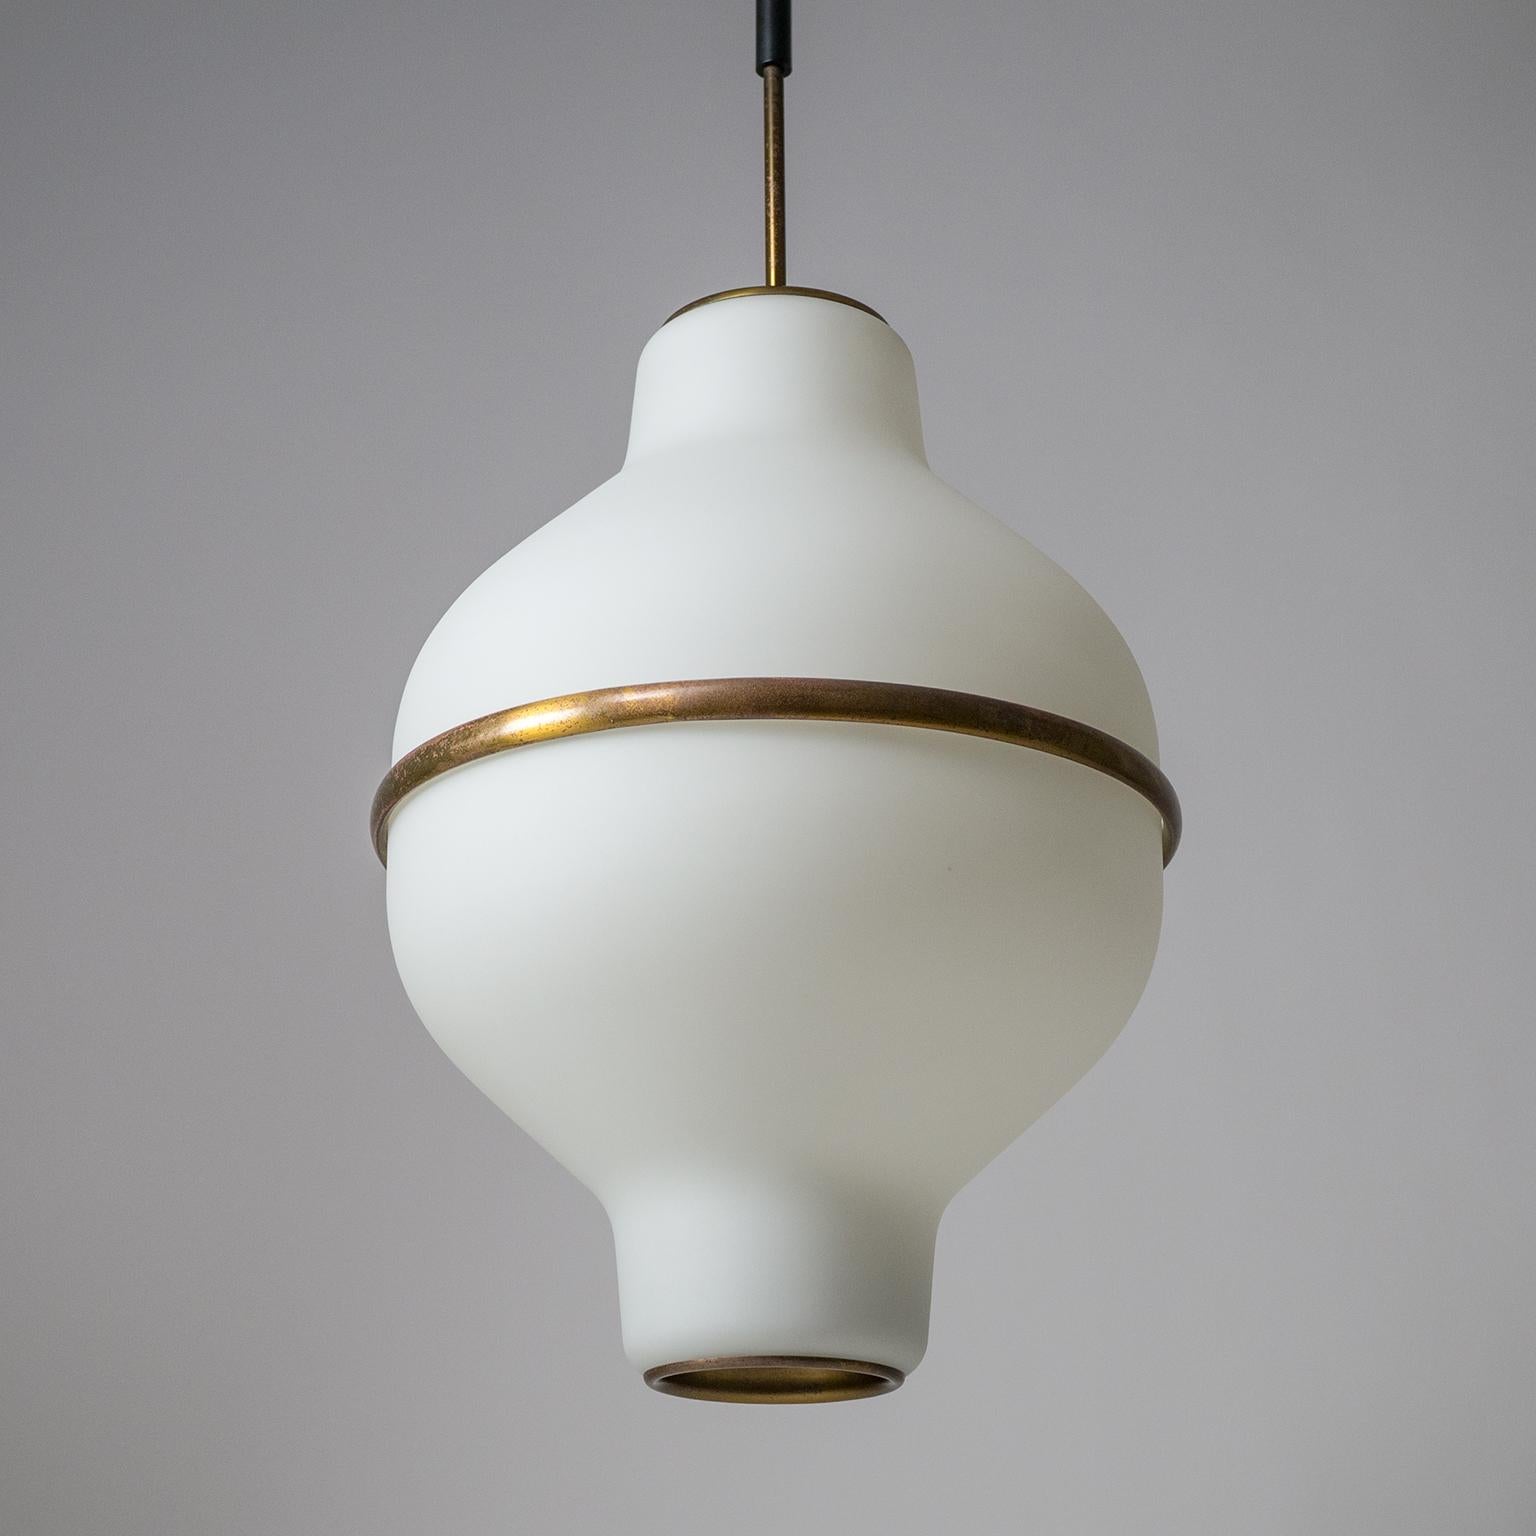 Superb Italian satin glass chandelier from the 1950s, designed by Oscar Torlasco for Lumi Milano (original manufacturers label on top). Two large tapered blown glass diffusers with a satin finish and a thick brass 